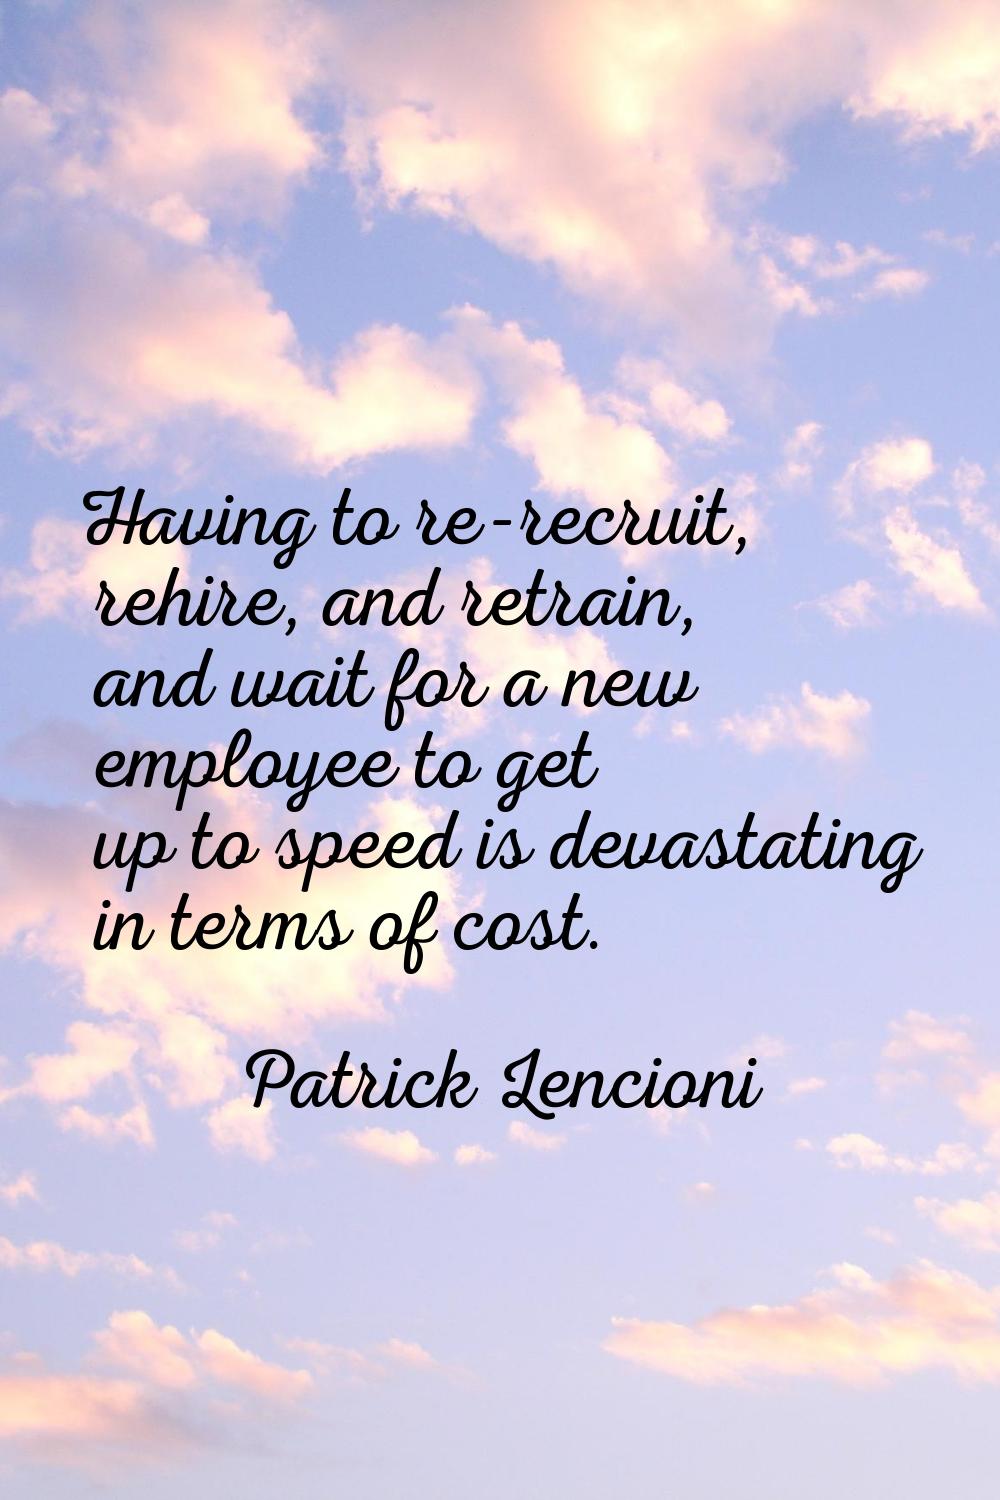 Having to re-recruit, rehire, and retrain, and wait for a new employee to get up to speed is devast